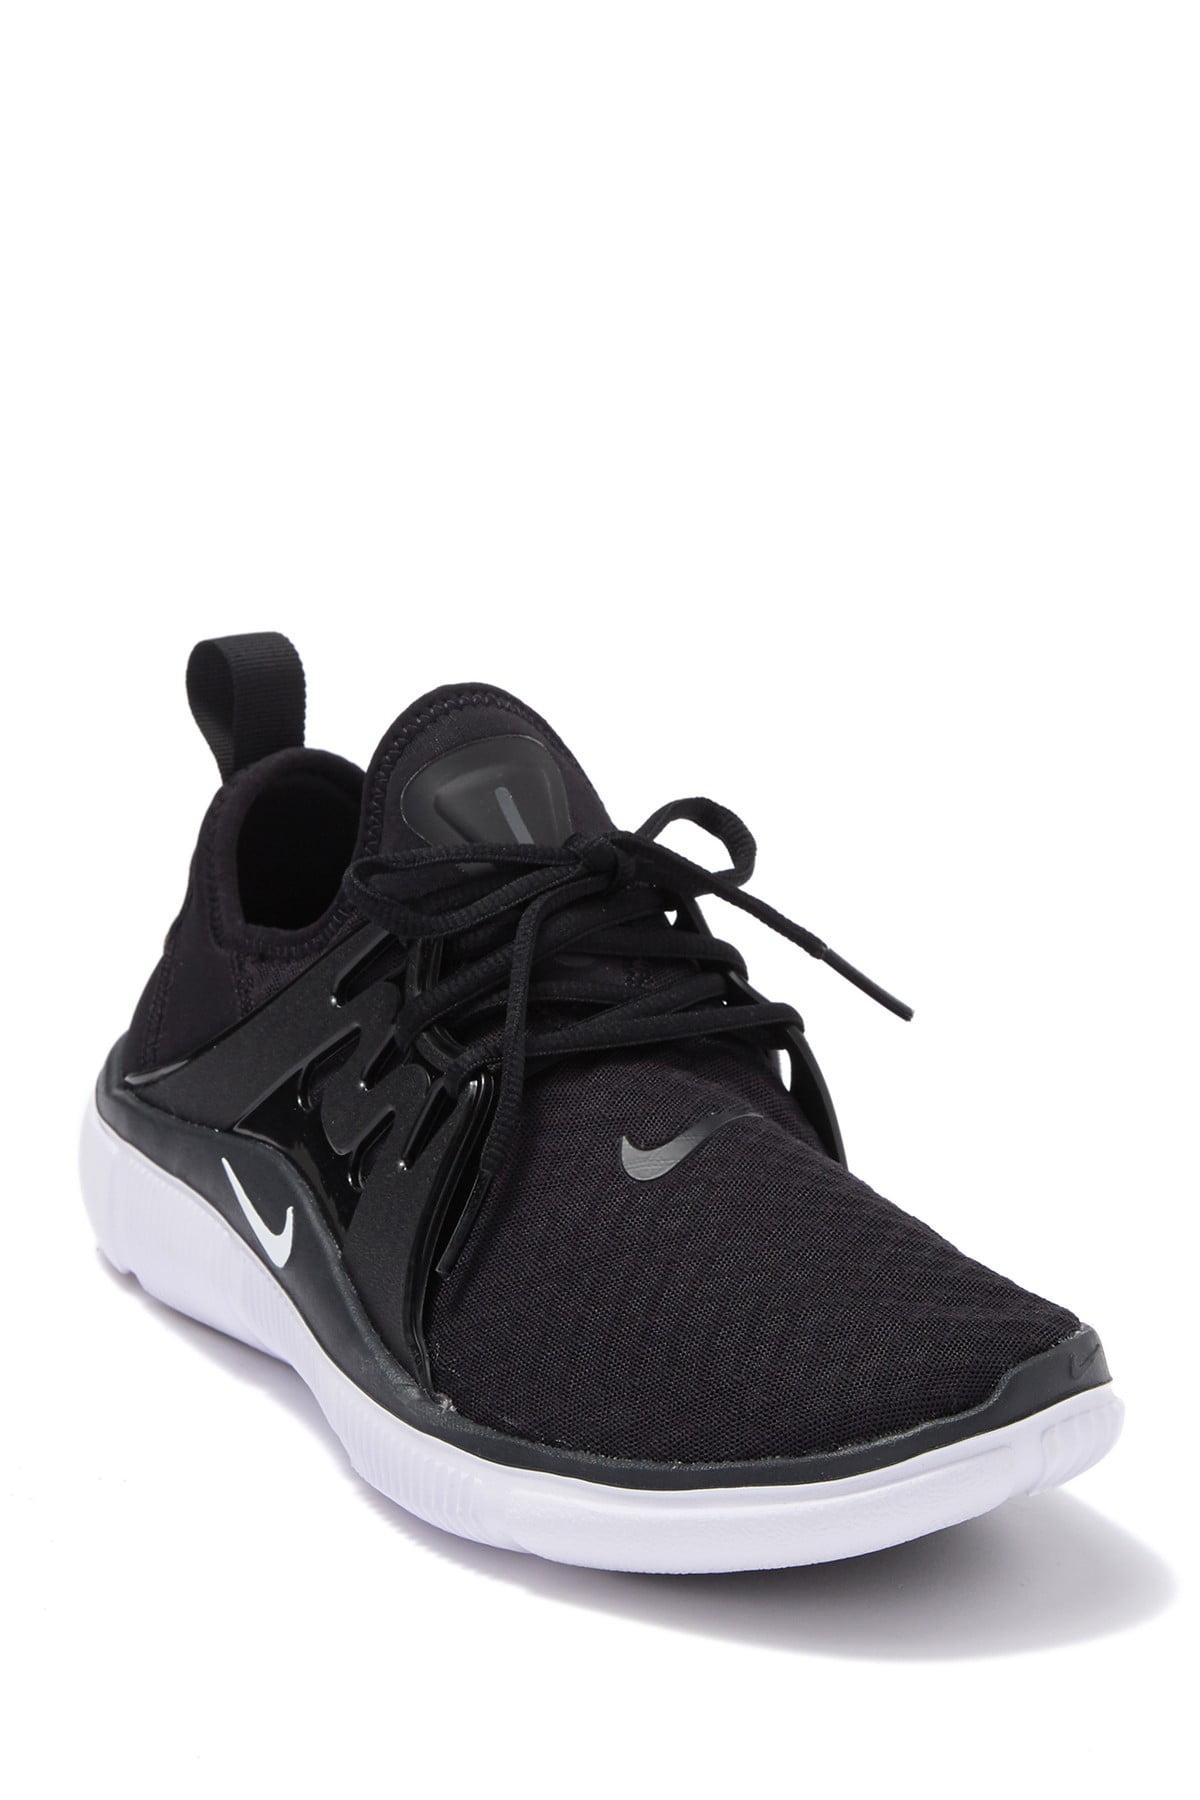 Nike Suede Acalme Sneaker in Black/White/Anthracite (Black) for Men - Save  25% | Lyst